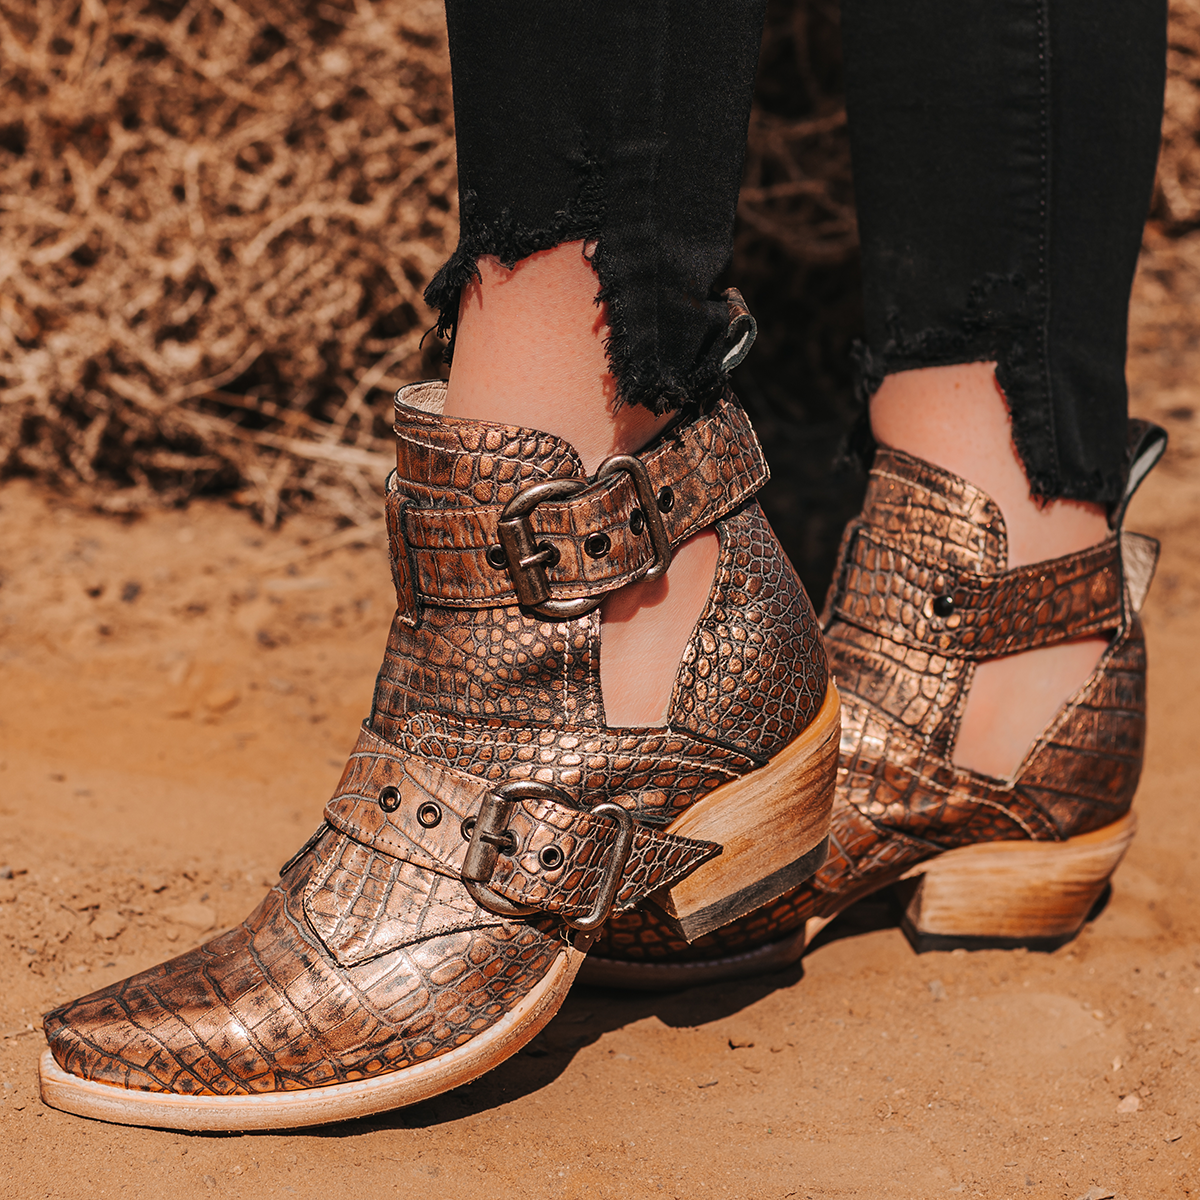 FREEBIRD women's Mayhem blush croco western ankle bootie with exposed sides, adjustable metal buckles, and snip toe